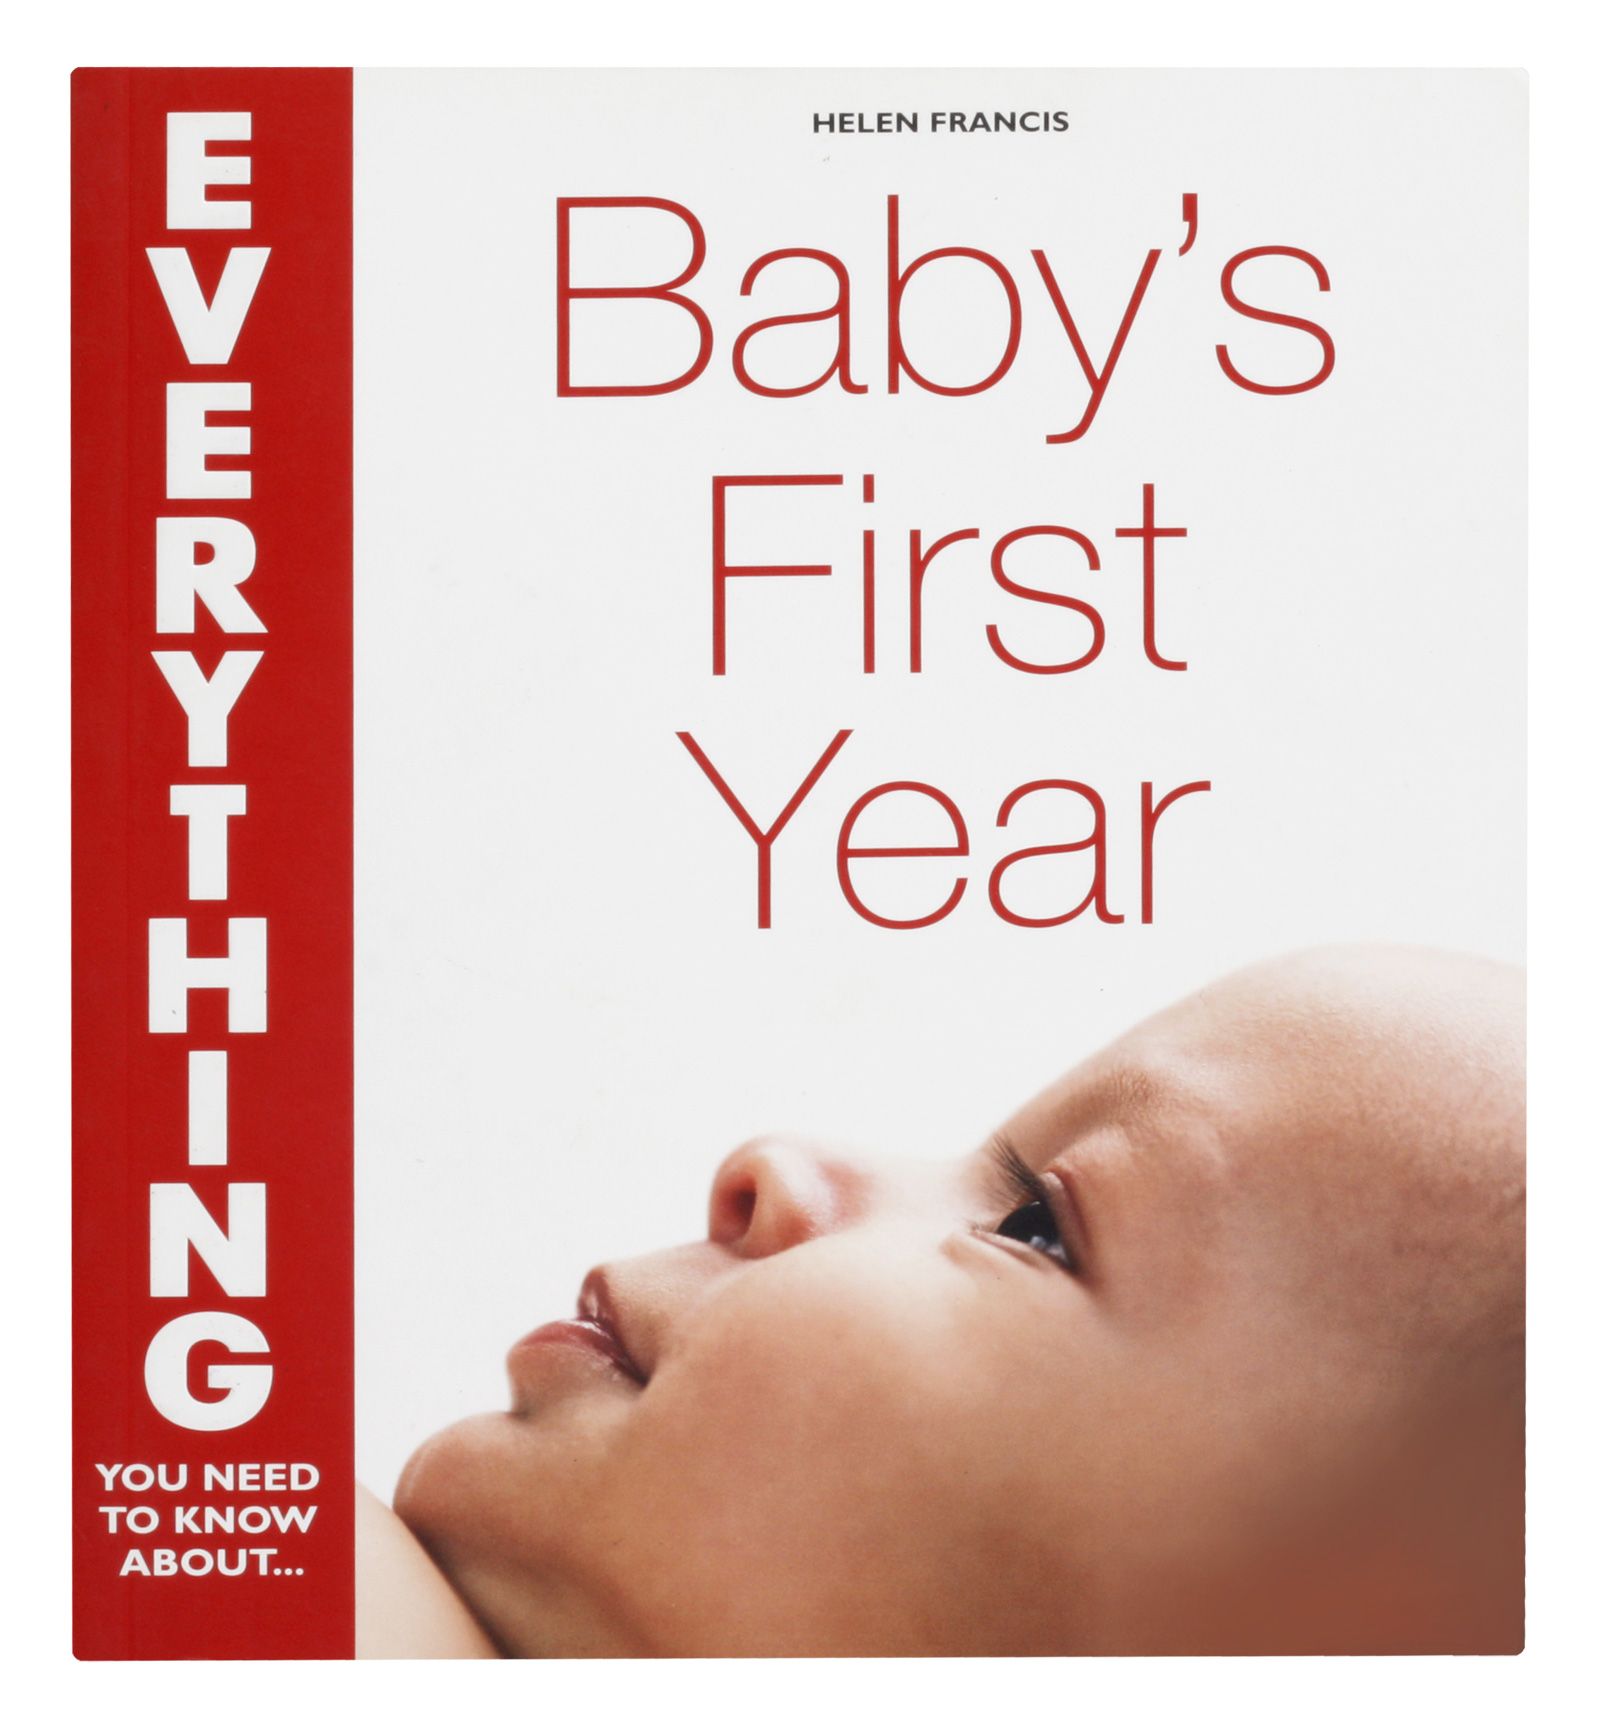 Everything You Need To Know About Babys First Year